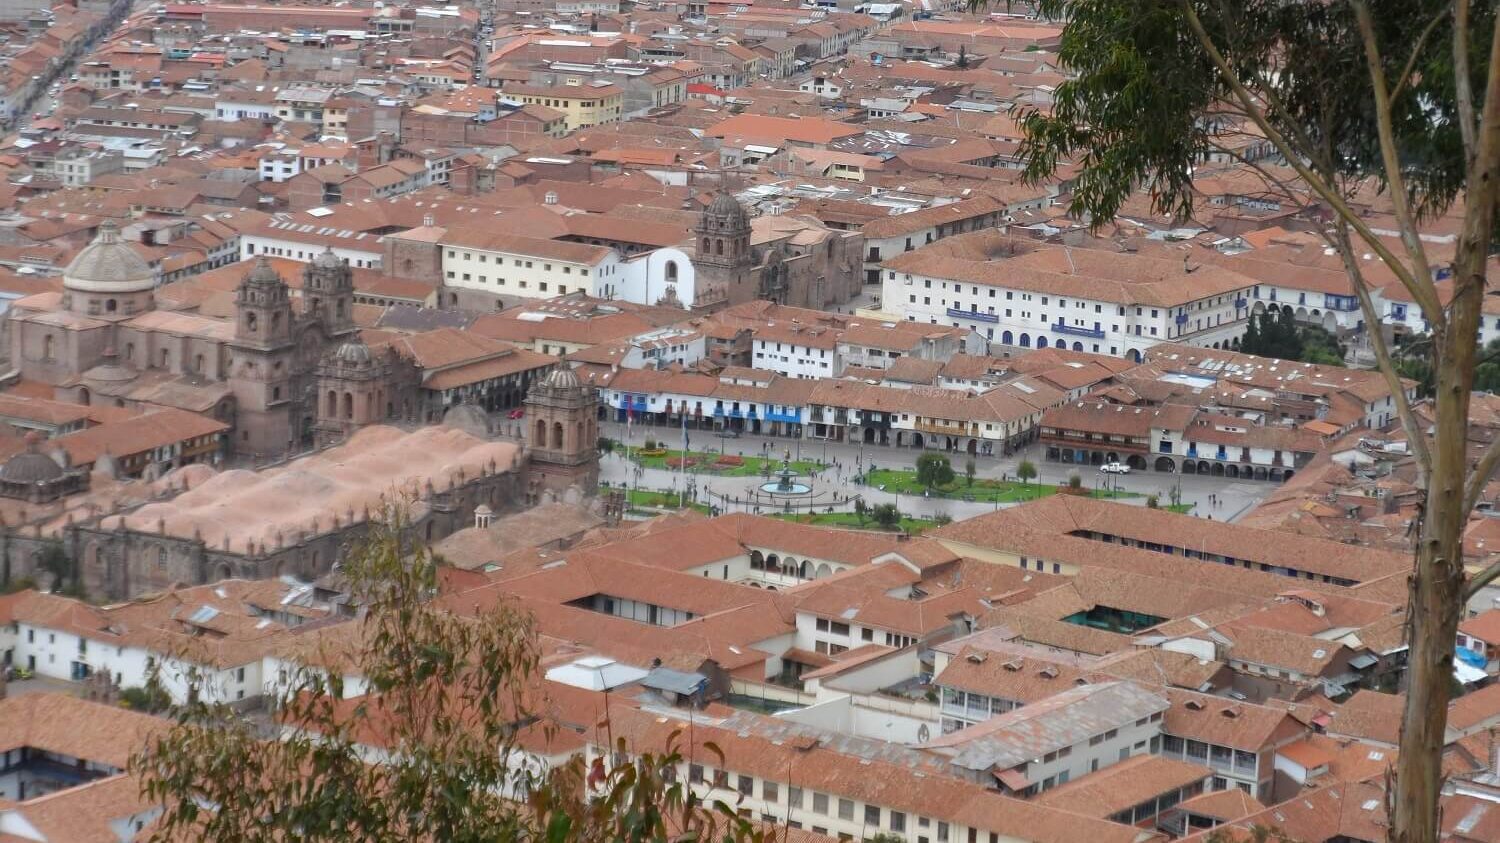 View to the historic center of Cusco, with the Plaza de Armas, churches and tiled rooftops. Visit Cusco alternatively with RESPONSible Travel Peru!